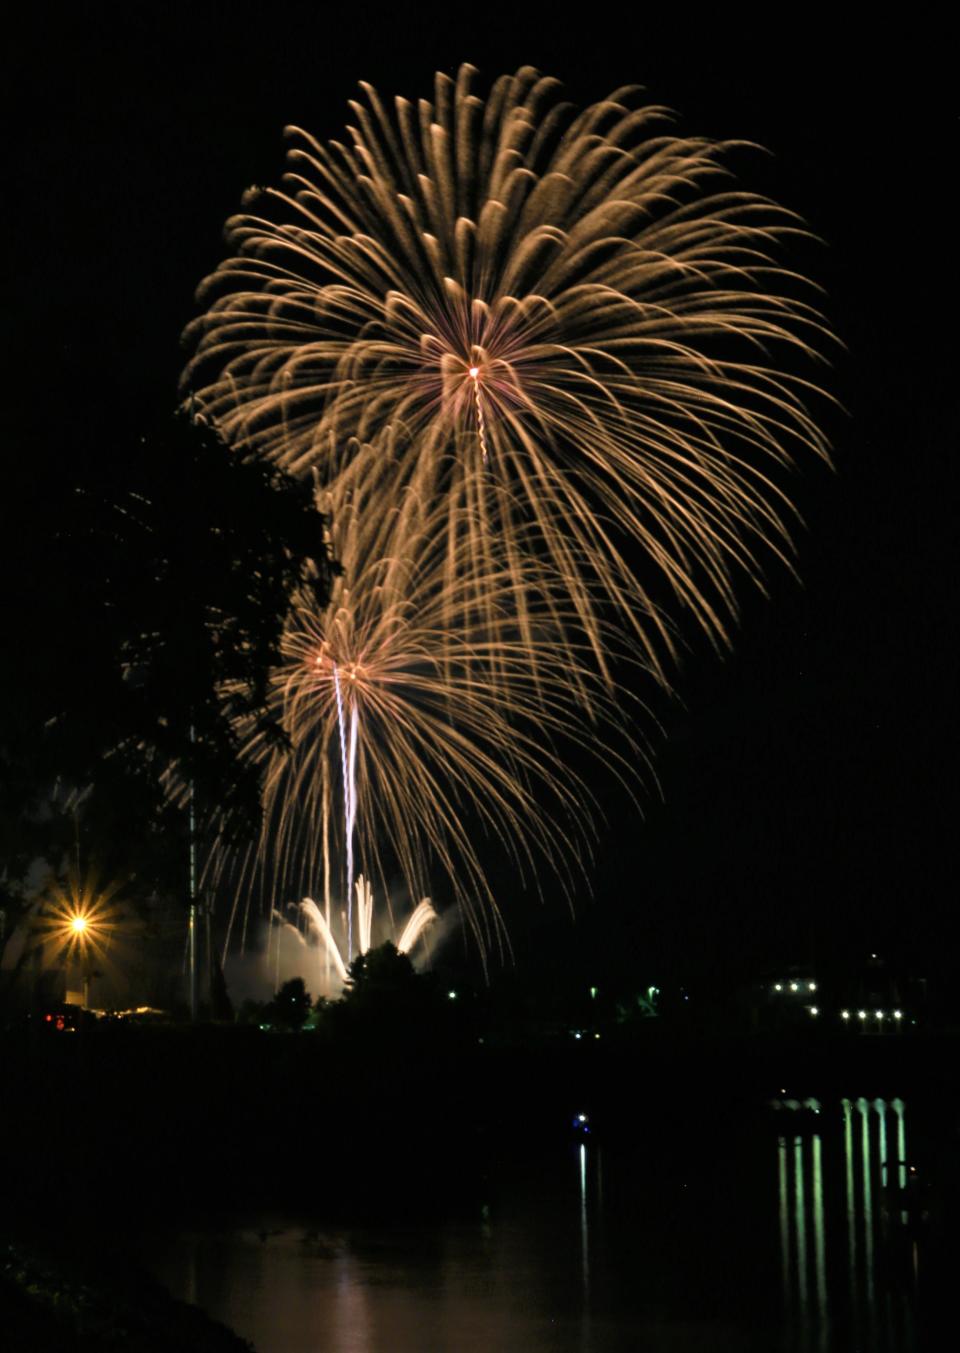 Fireworks capped the night of celebration at Fort Campbell on July 4 in 2019.